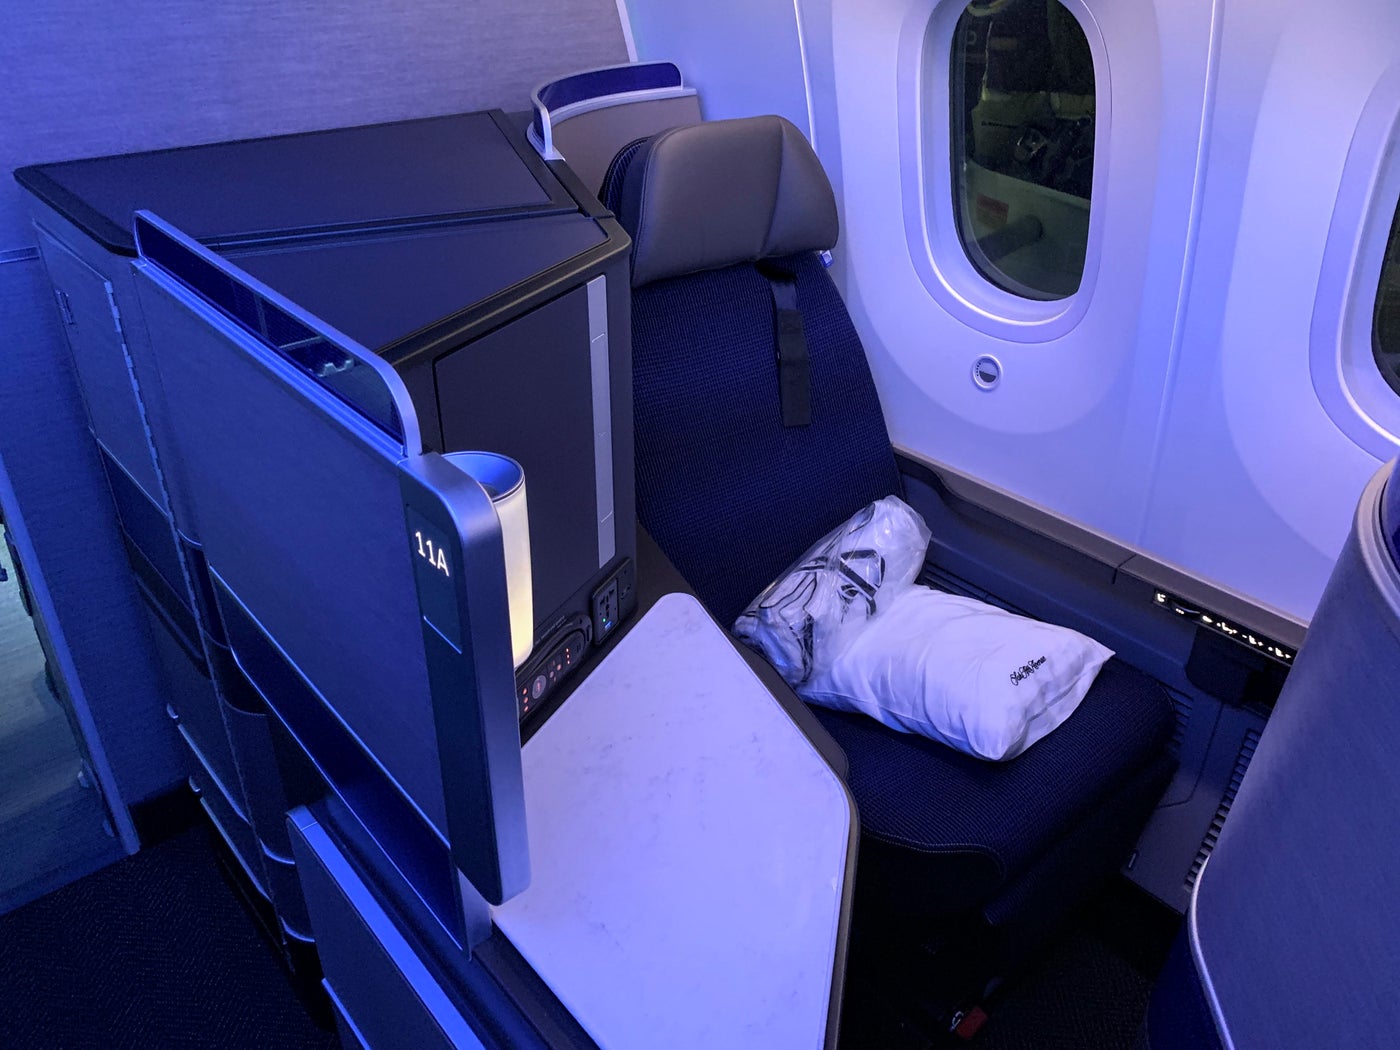 What It Was Like to Fly United's Newest 787-10 Dreamliner